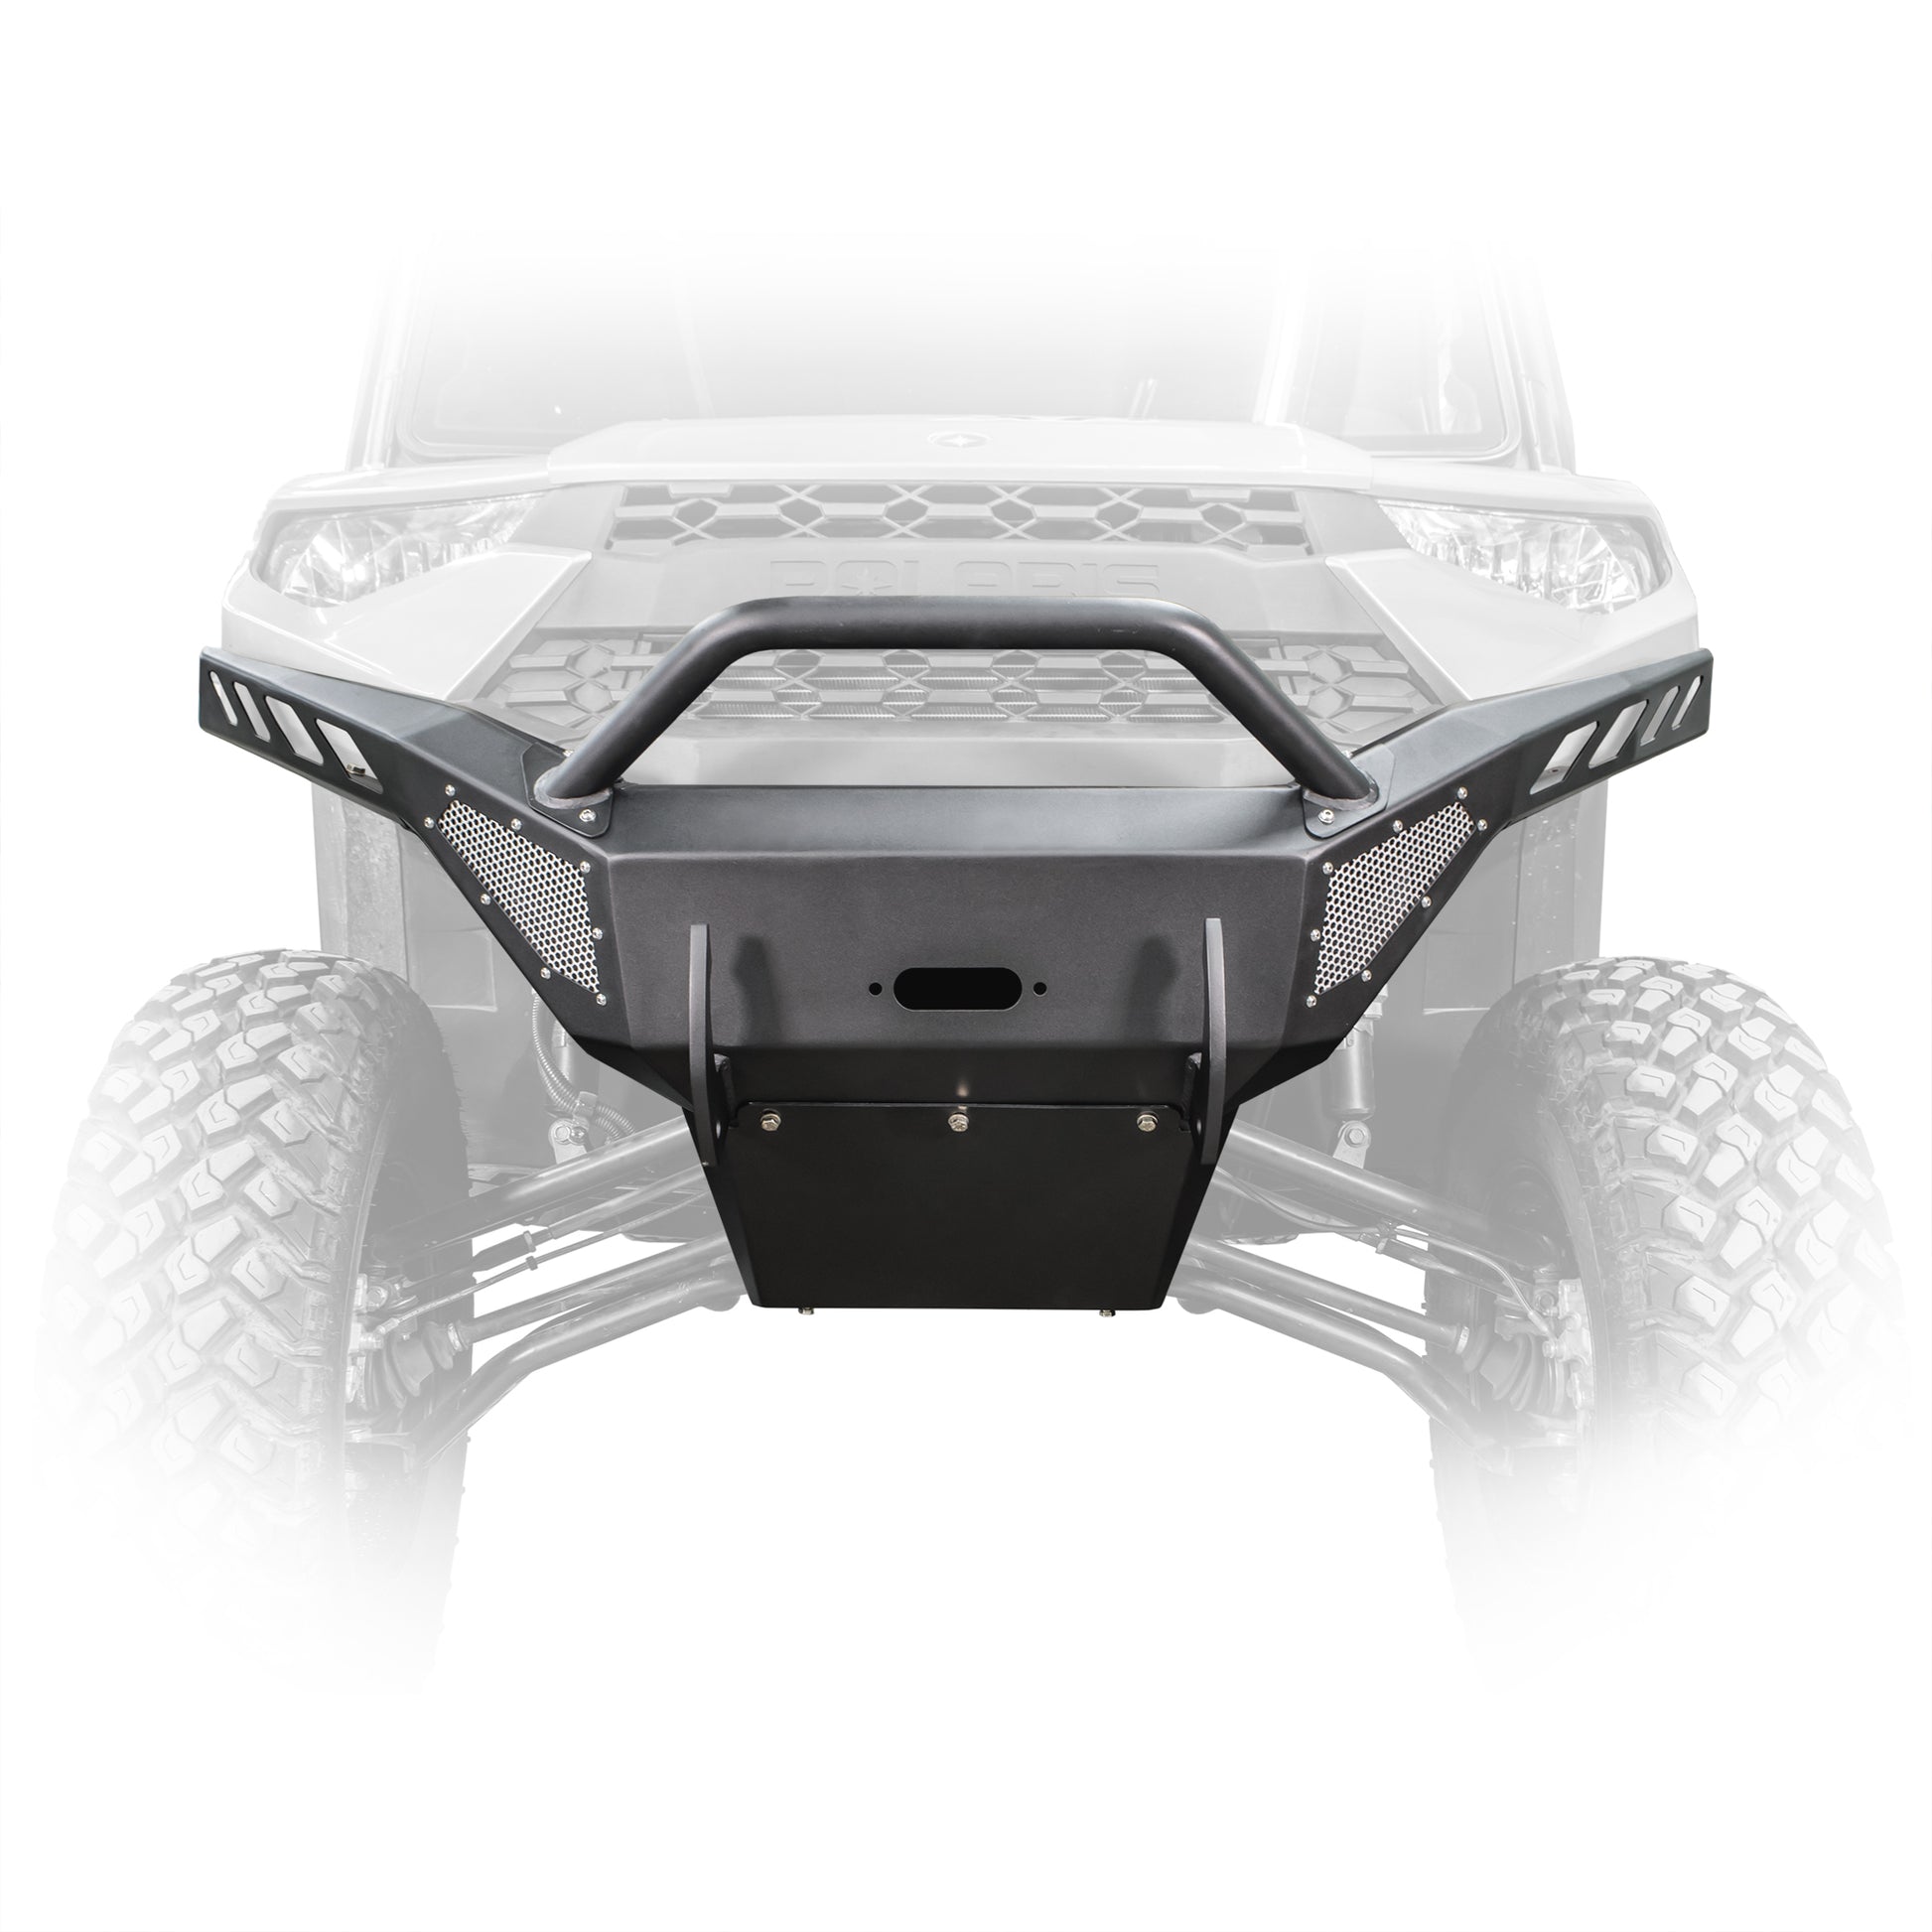 DRT Polaris 2019+ Ranger XP 1000 All Models Front Winch Bumper and Skid Plate front view